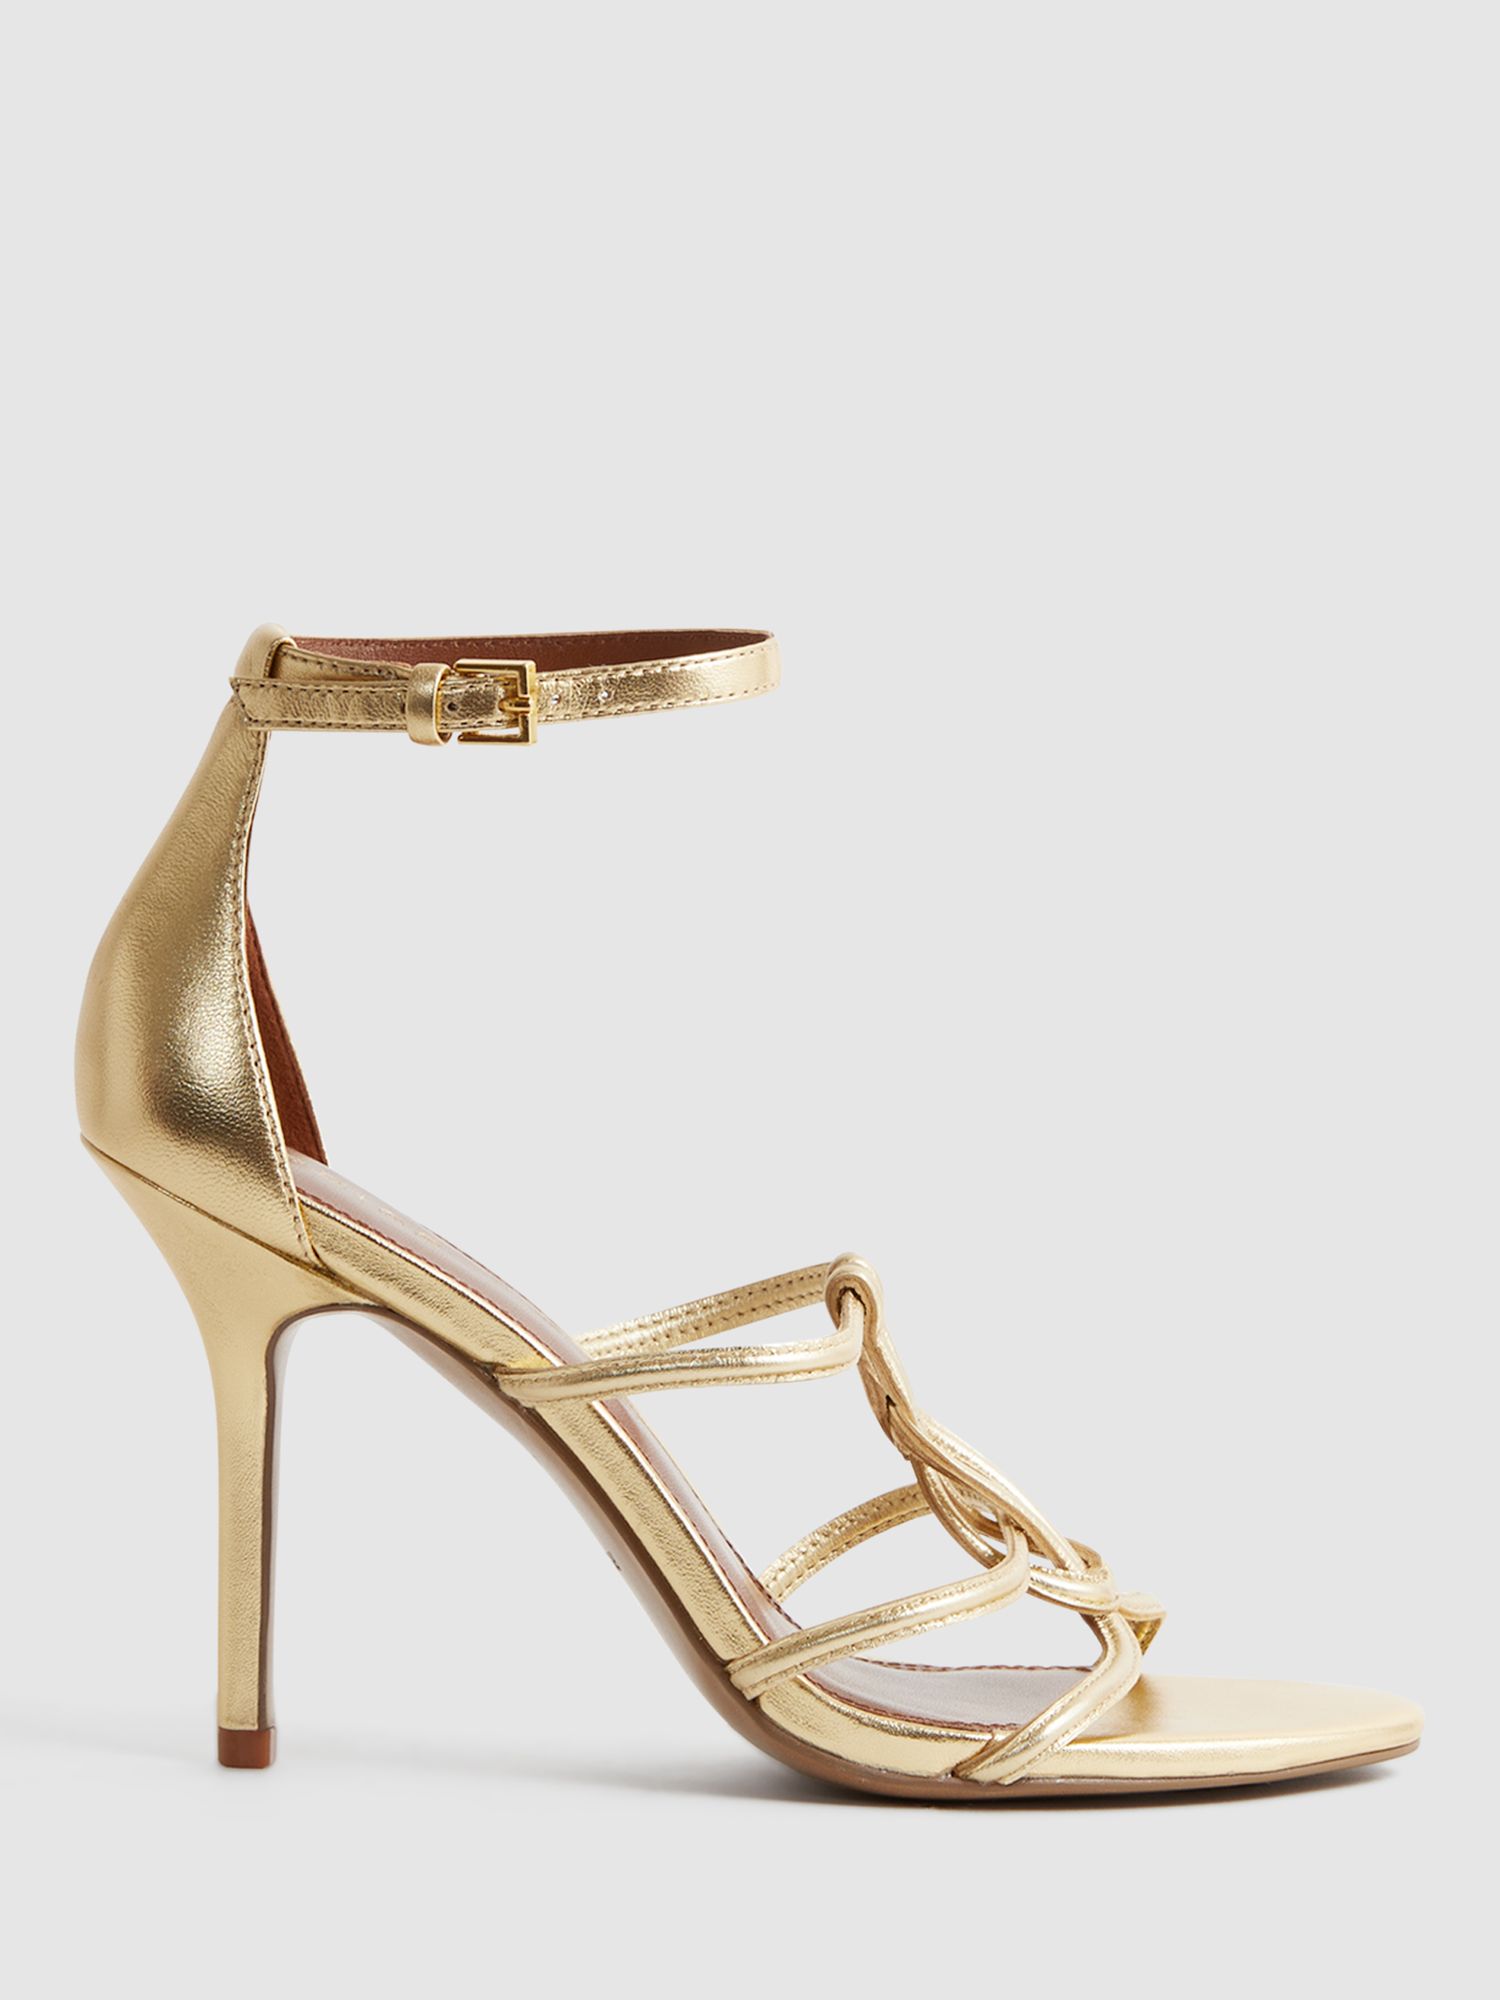 Reiss Hallie Heeled Strappy Sandals, Gold at John Lewis & Partners